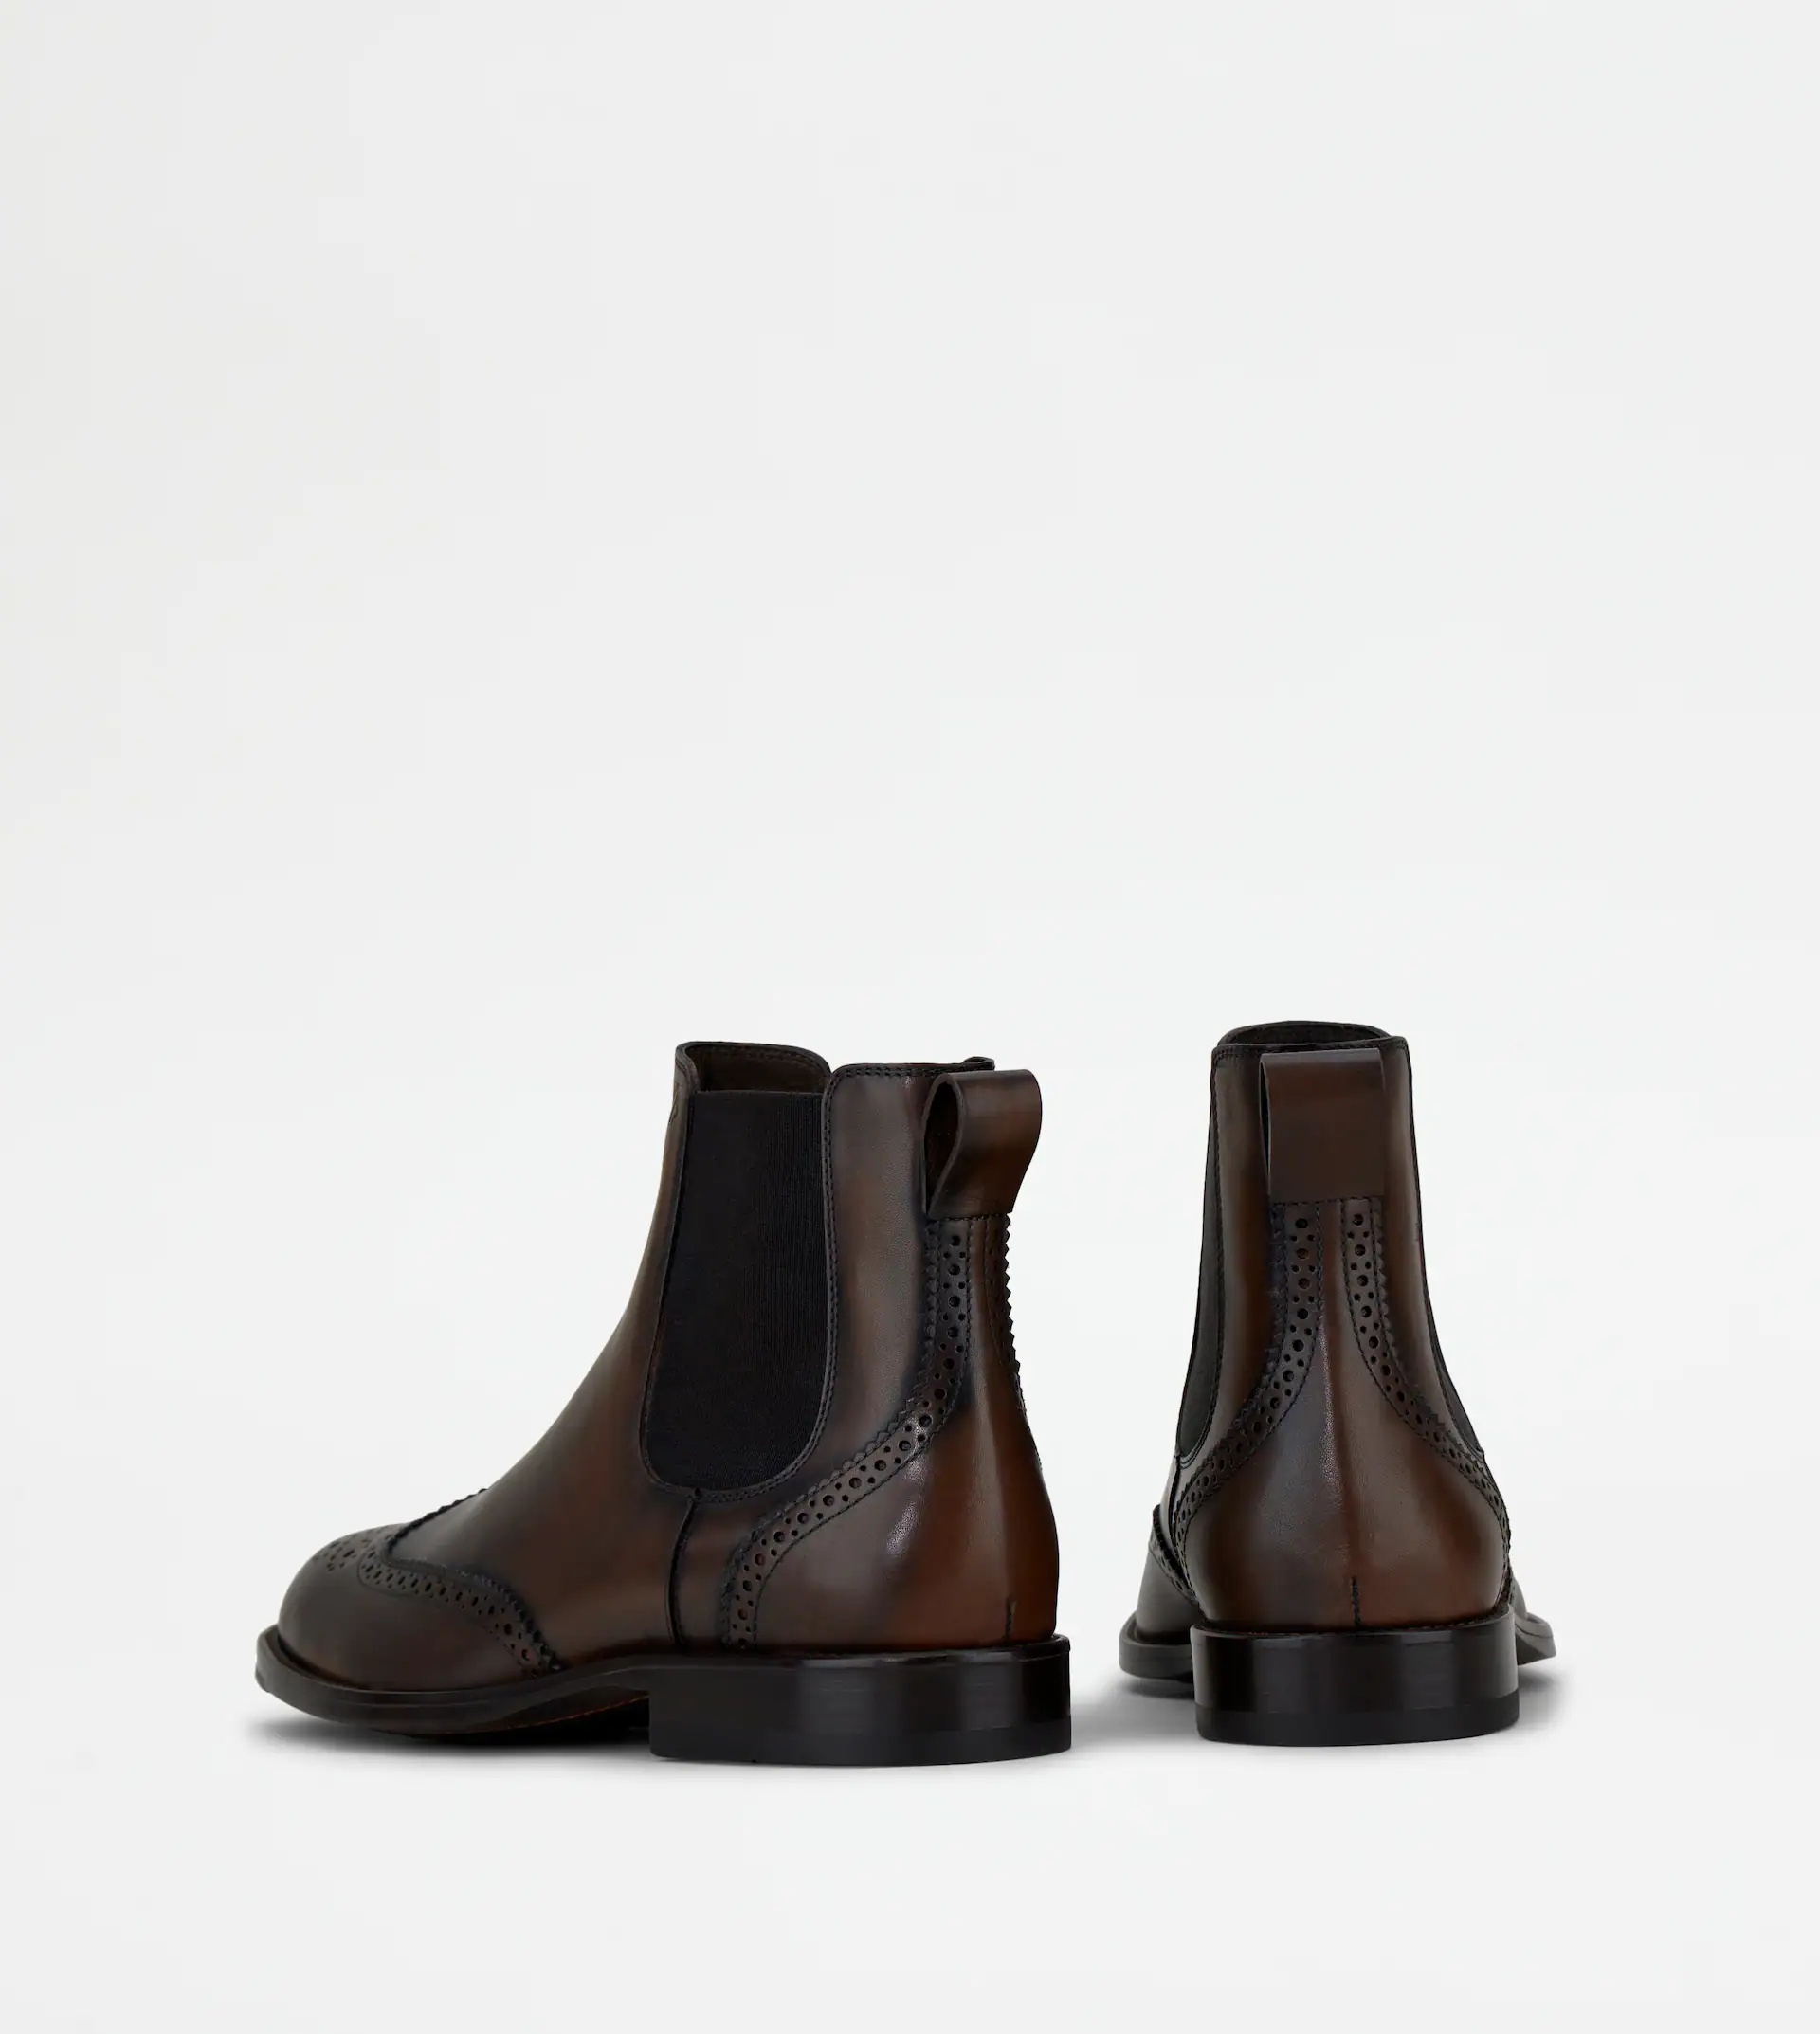 ANKLE BOOTS IN LEATHER - BROWN - 2